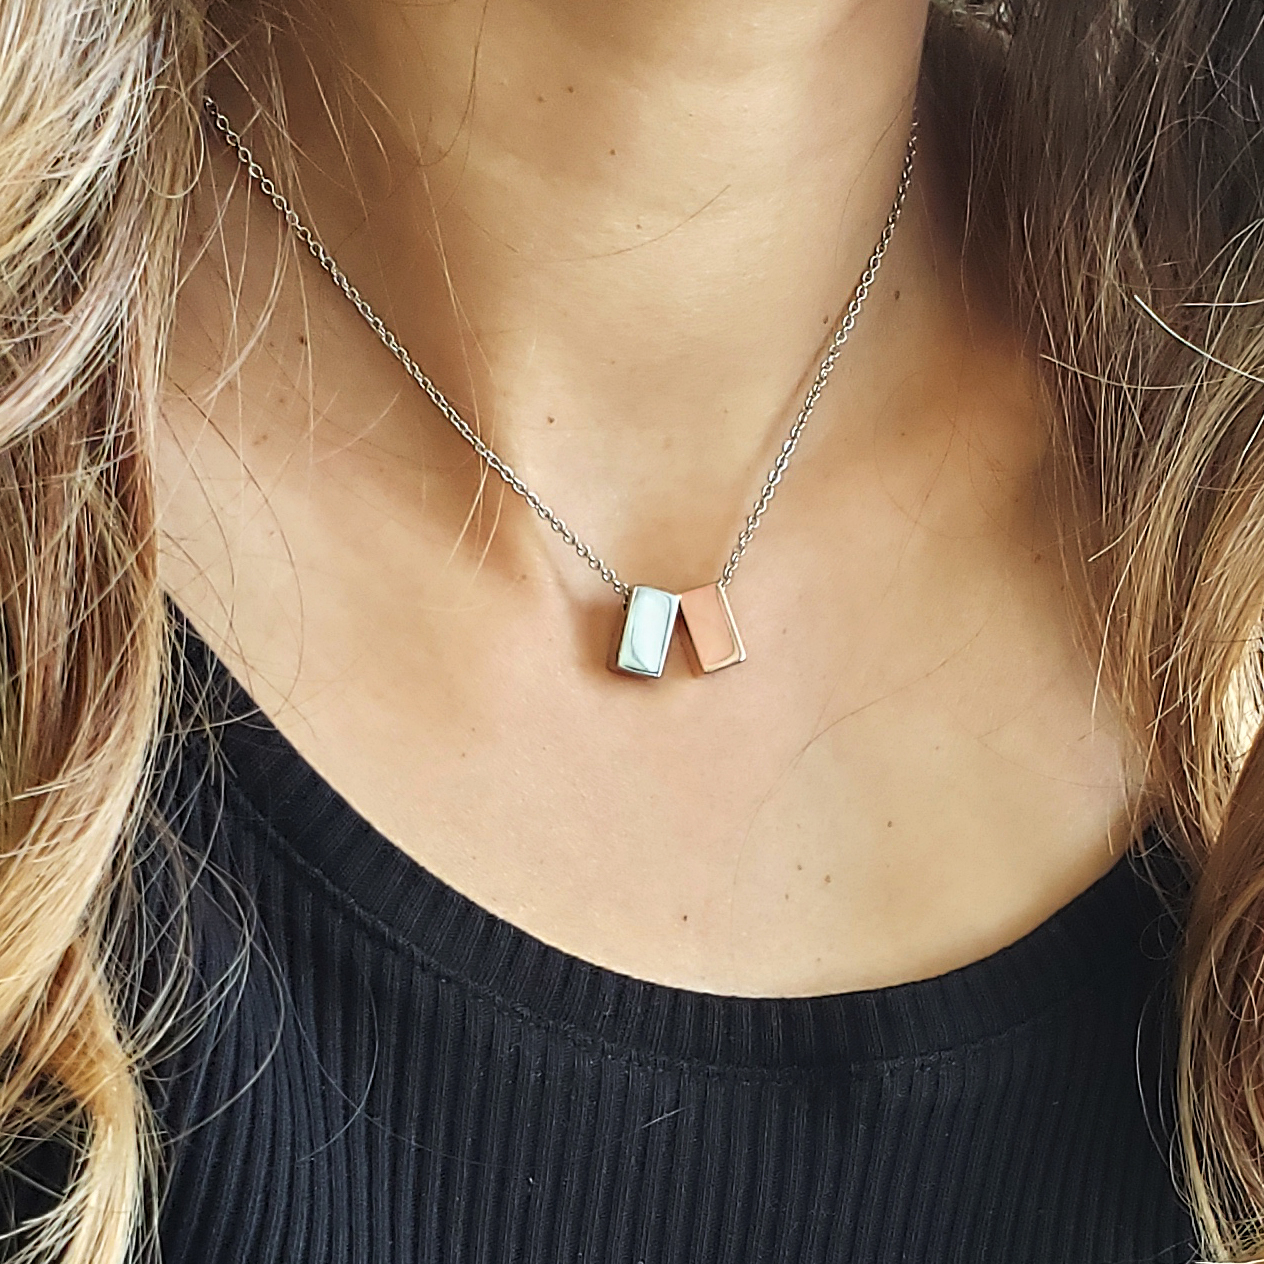 Anavia Best Friend Necklace, Friendship Necklace, Jewelry Gift, Gift for Friend, Birthday Gift, Christmas Gift for Her, Double Cubes Pendant Necklace